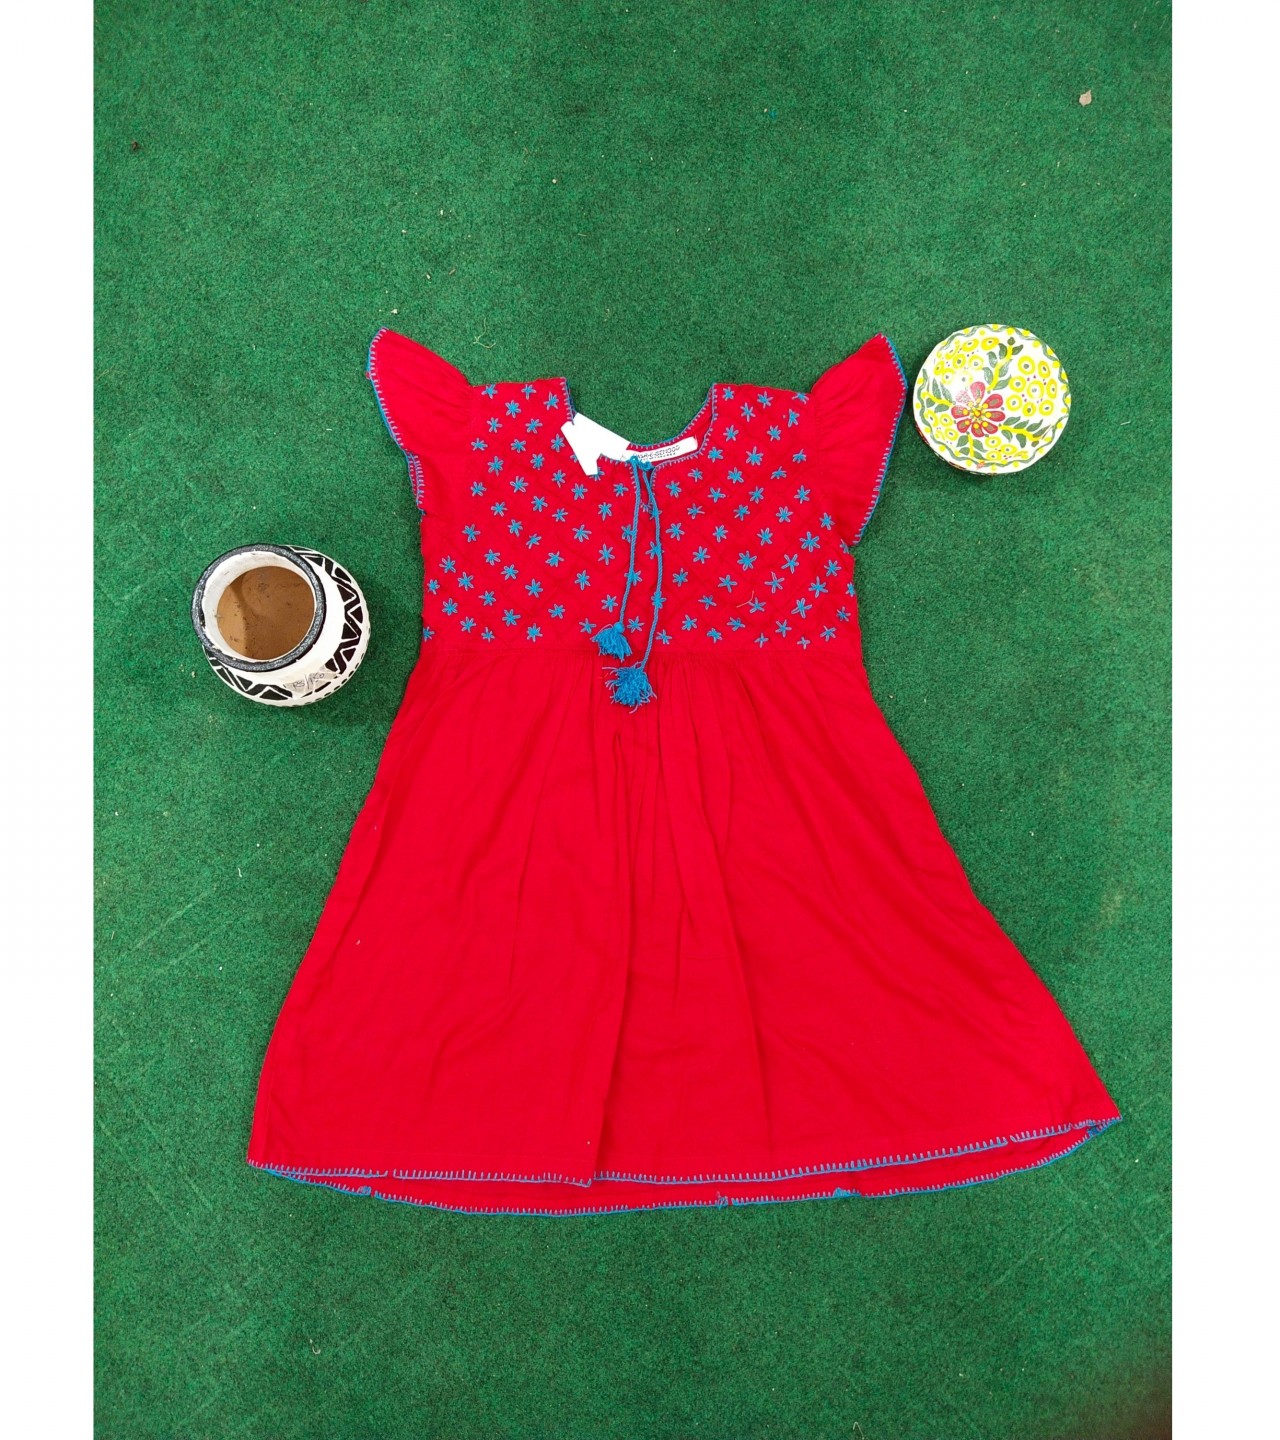 Girl Embroidery Dress